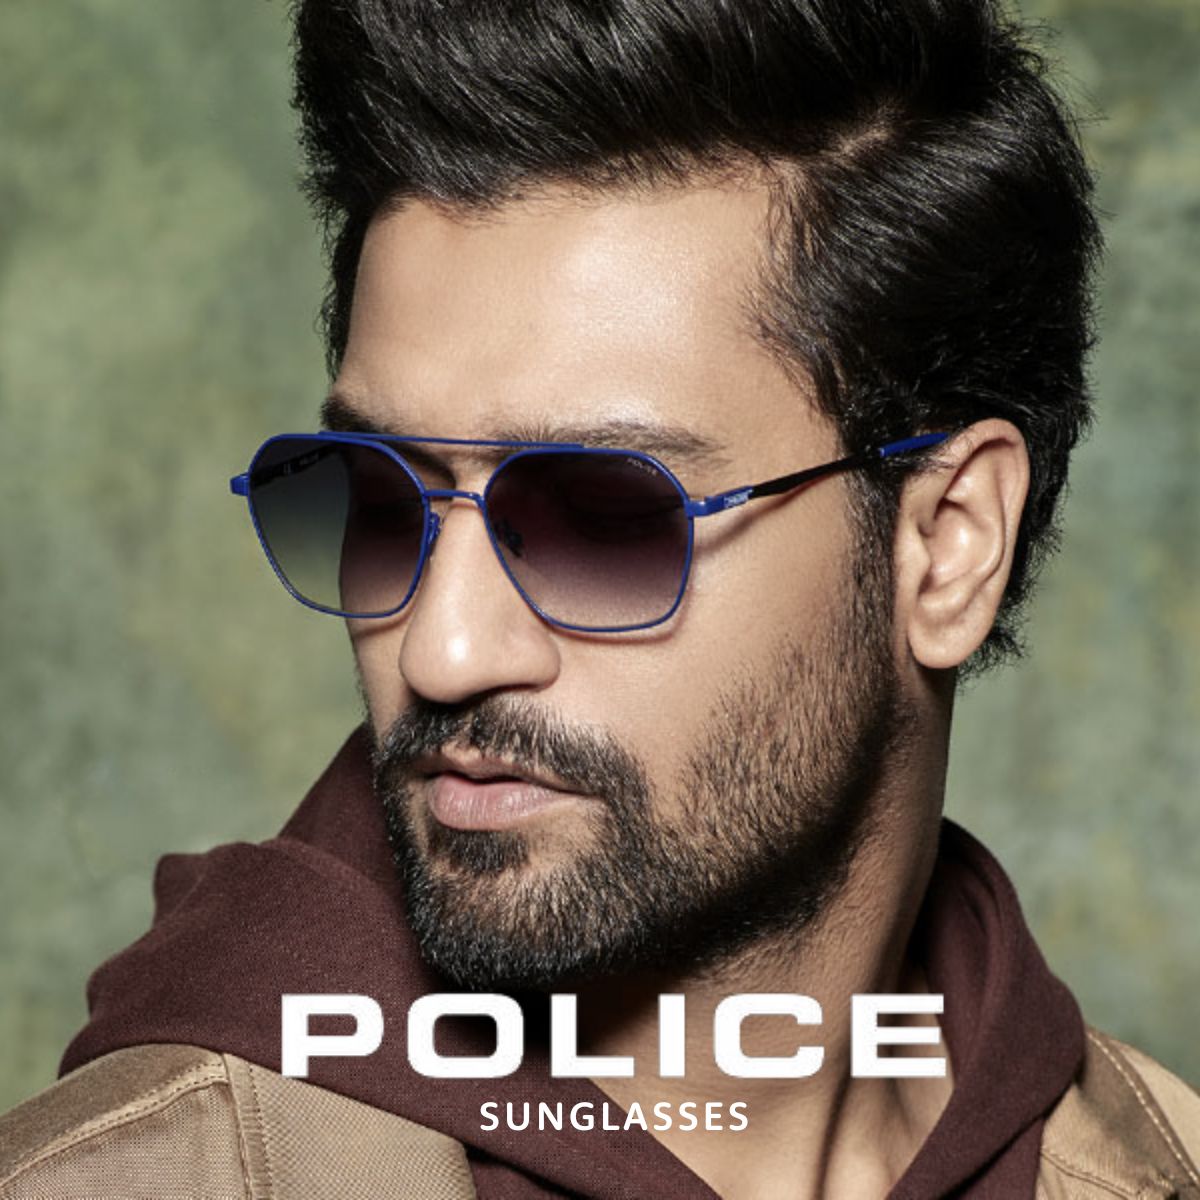 "Explore the best deals on premium Police sunglasses for men and women at Optorium, featuring a wide selection of stylish shades and goggles with free shipping and easy returns."